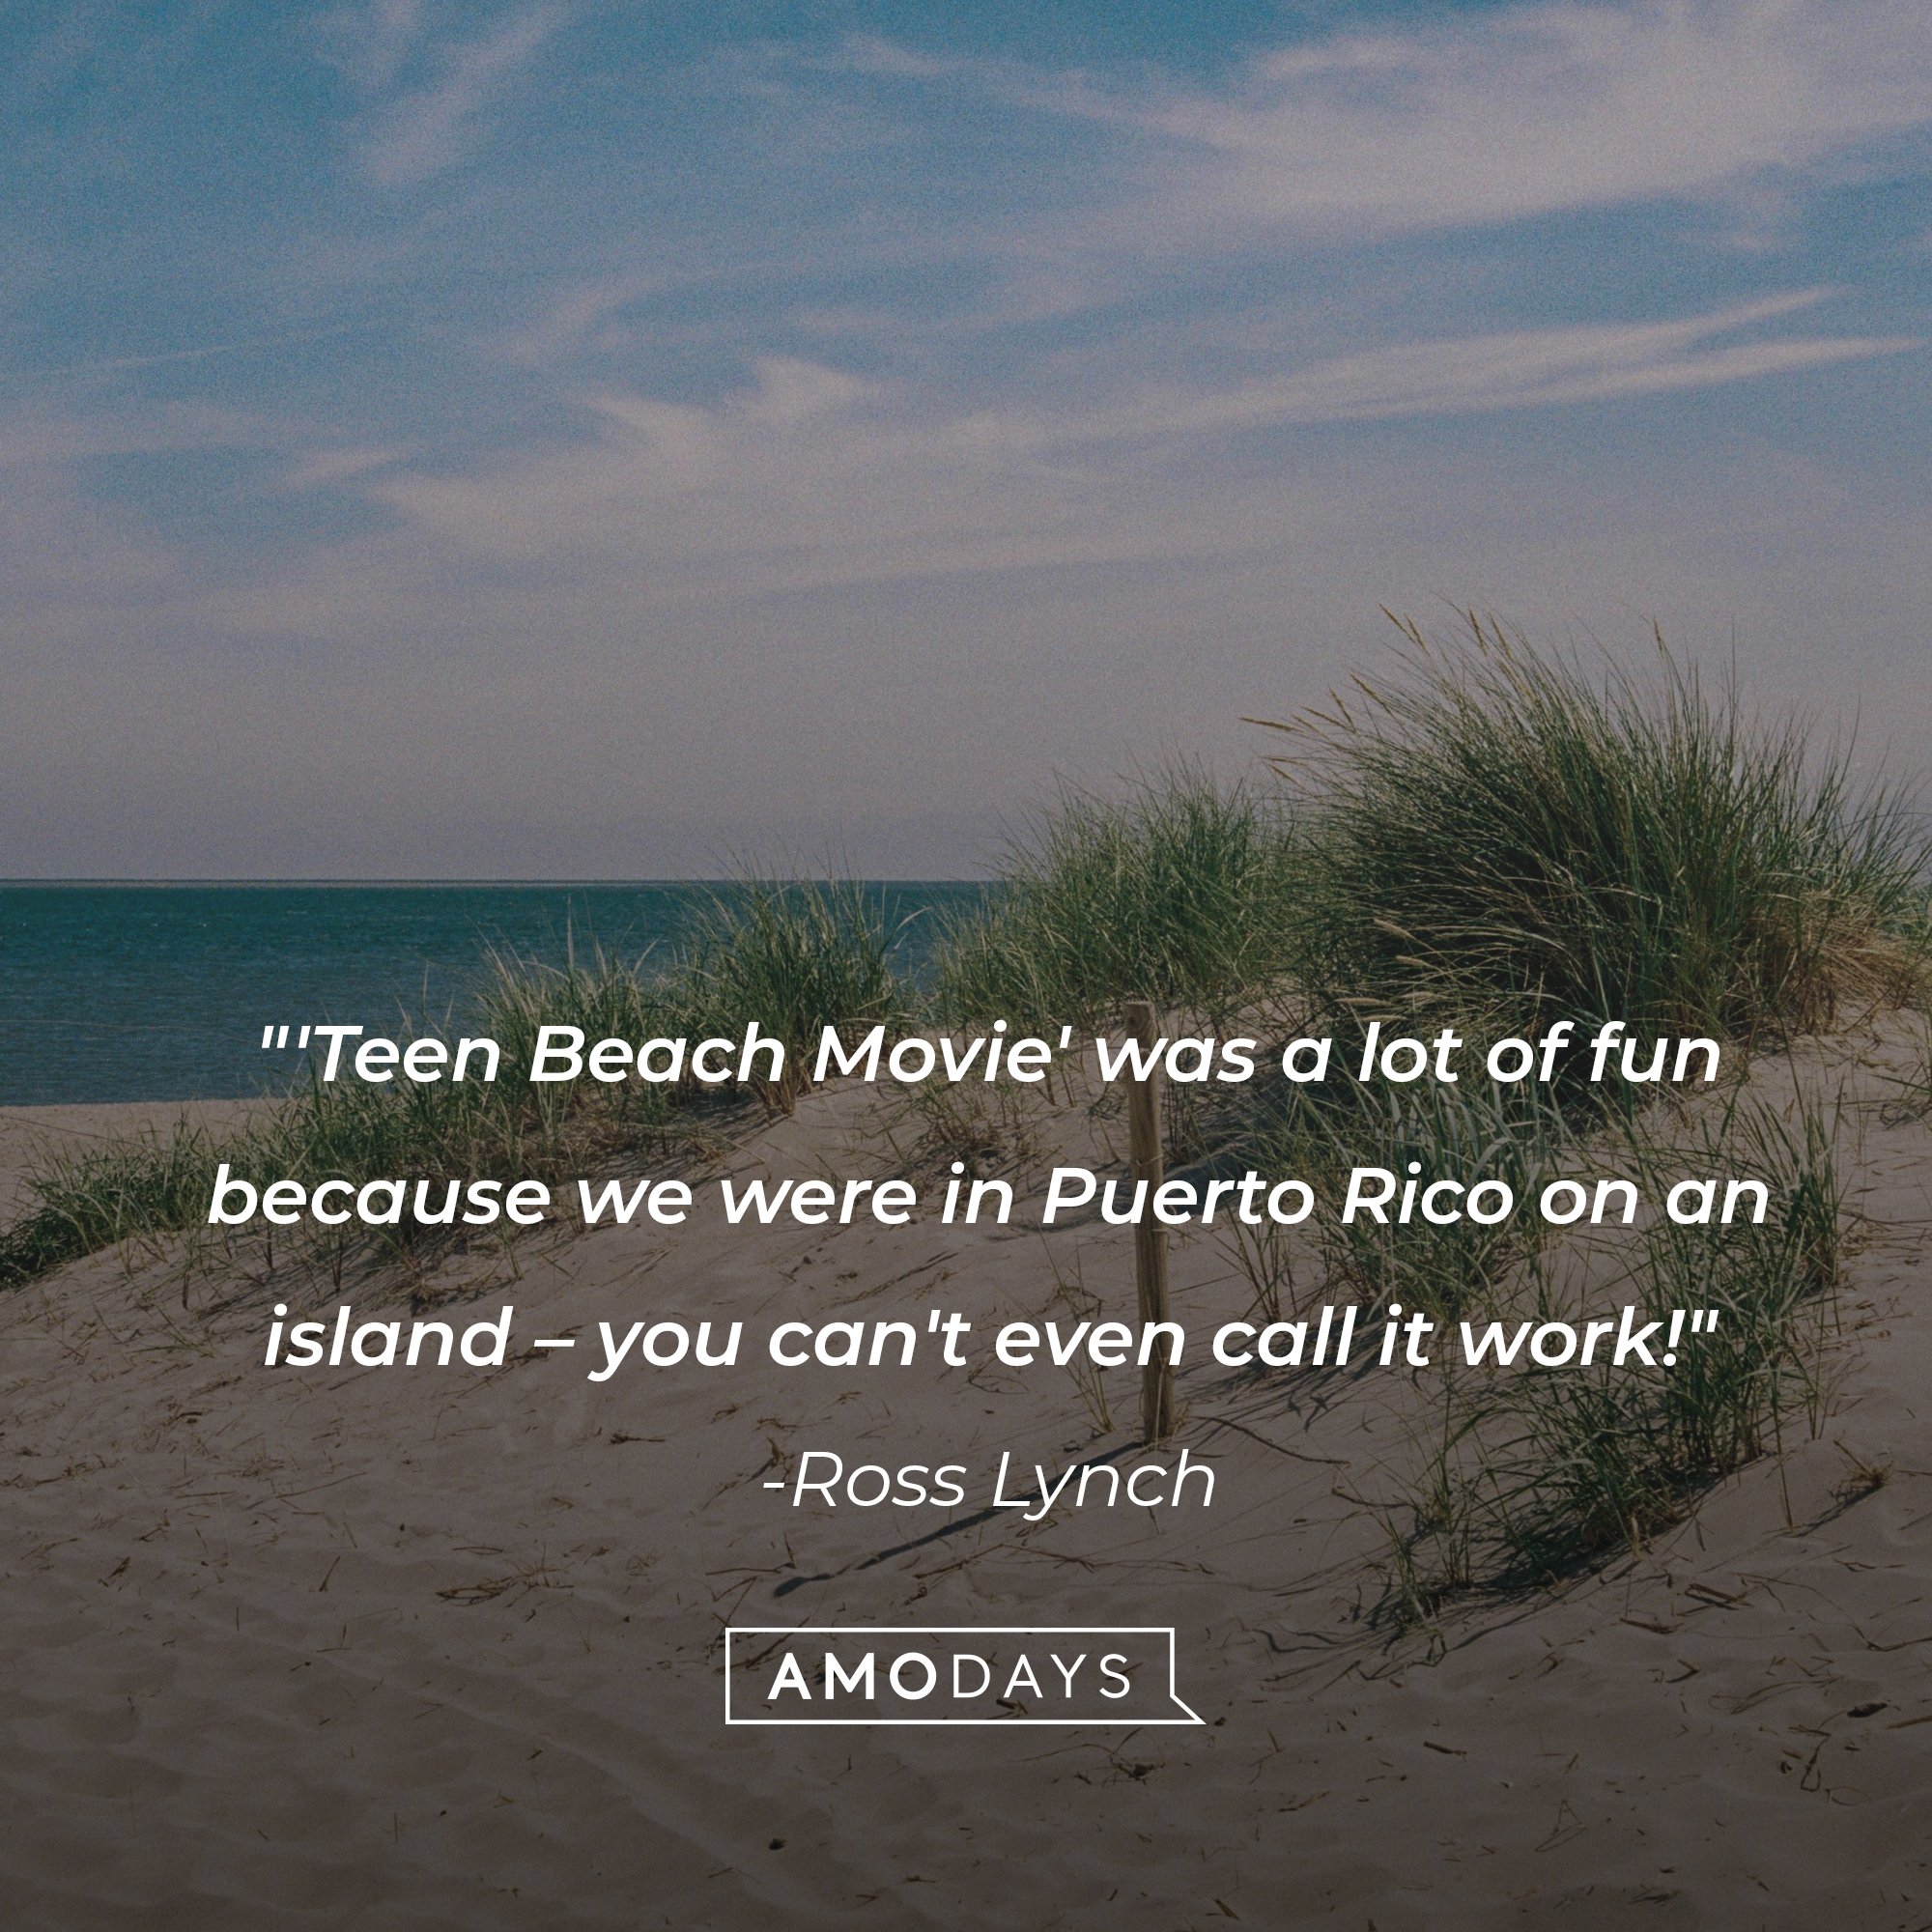 Ross Lynch's quote: "'Teen Beach Movie' was a lot of fun because we were in Puerto Rico on an island – you can't even call it work!" | Image: AmoDays